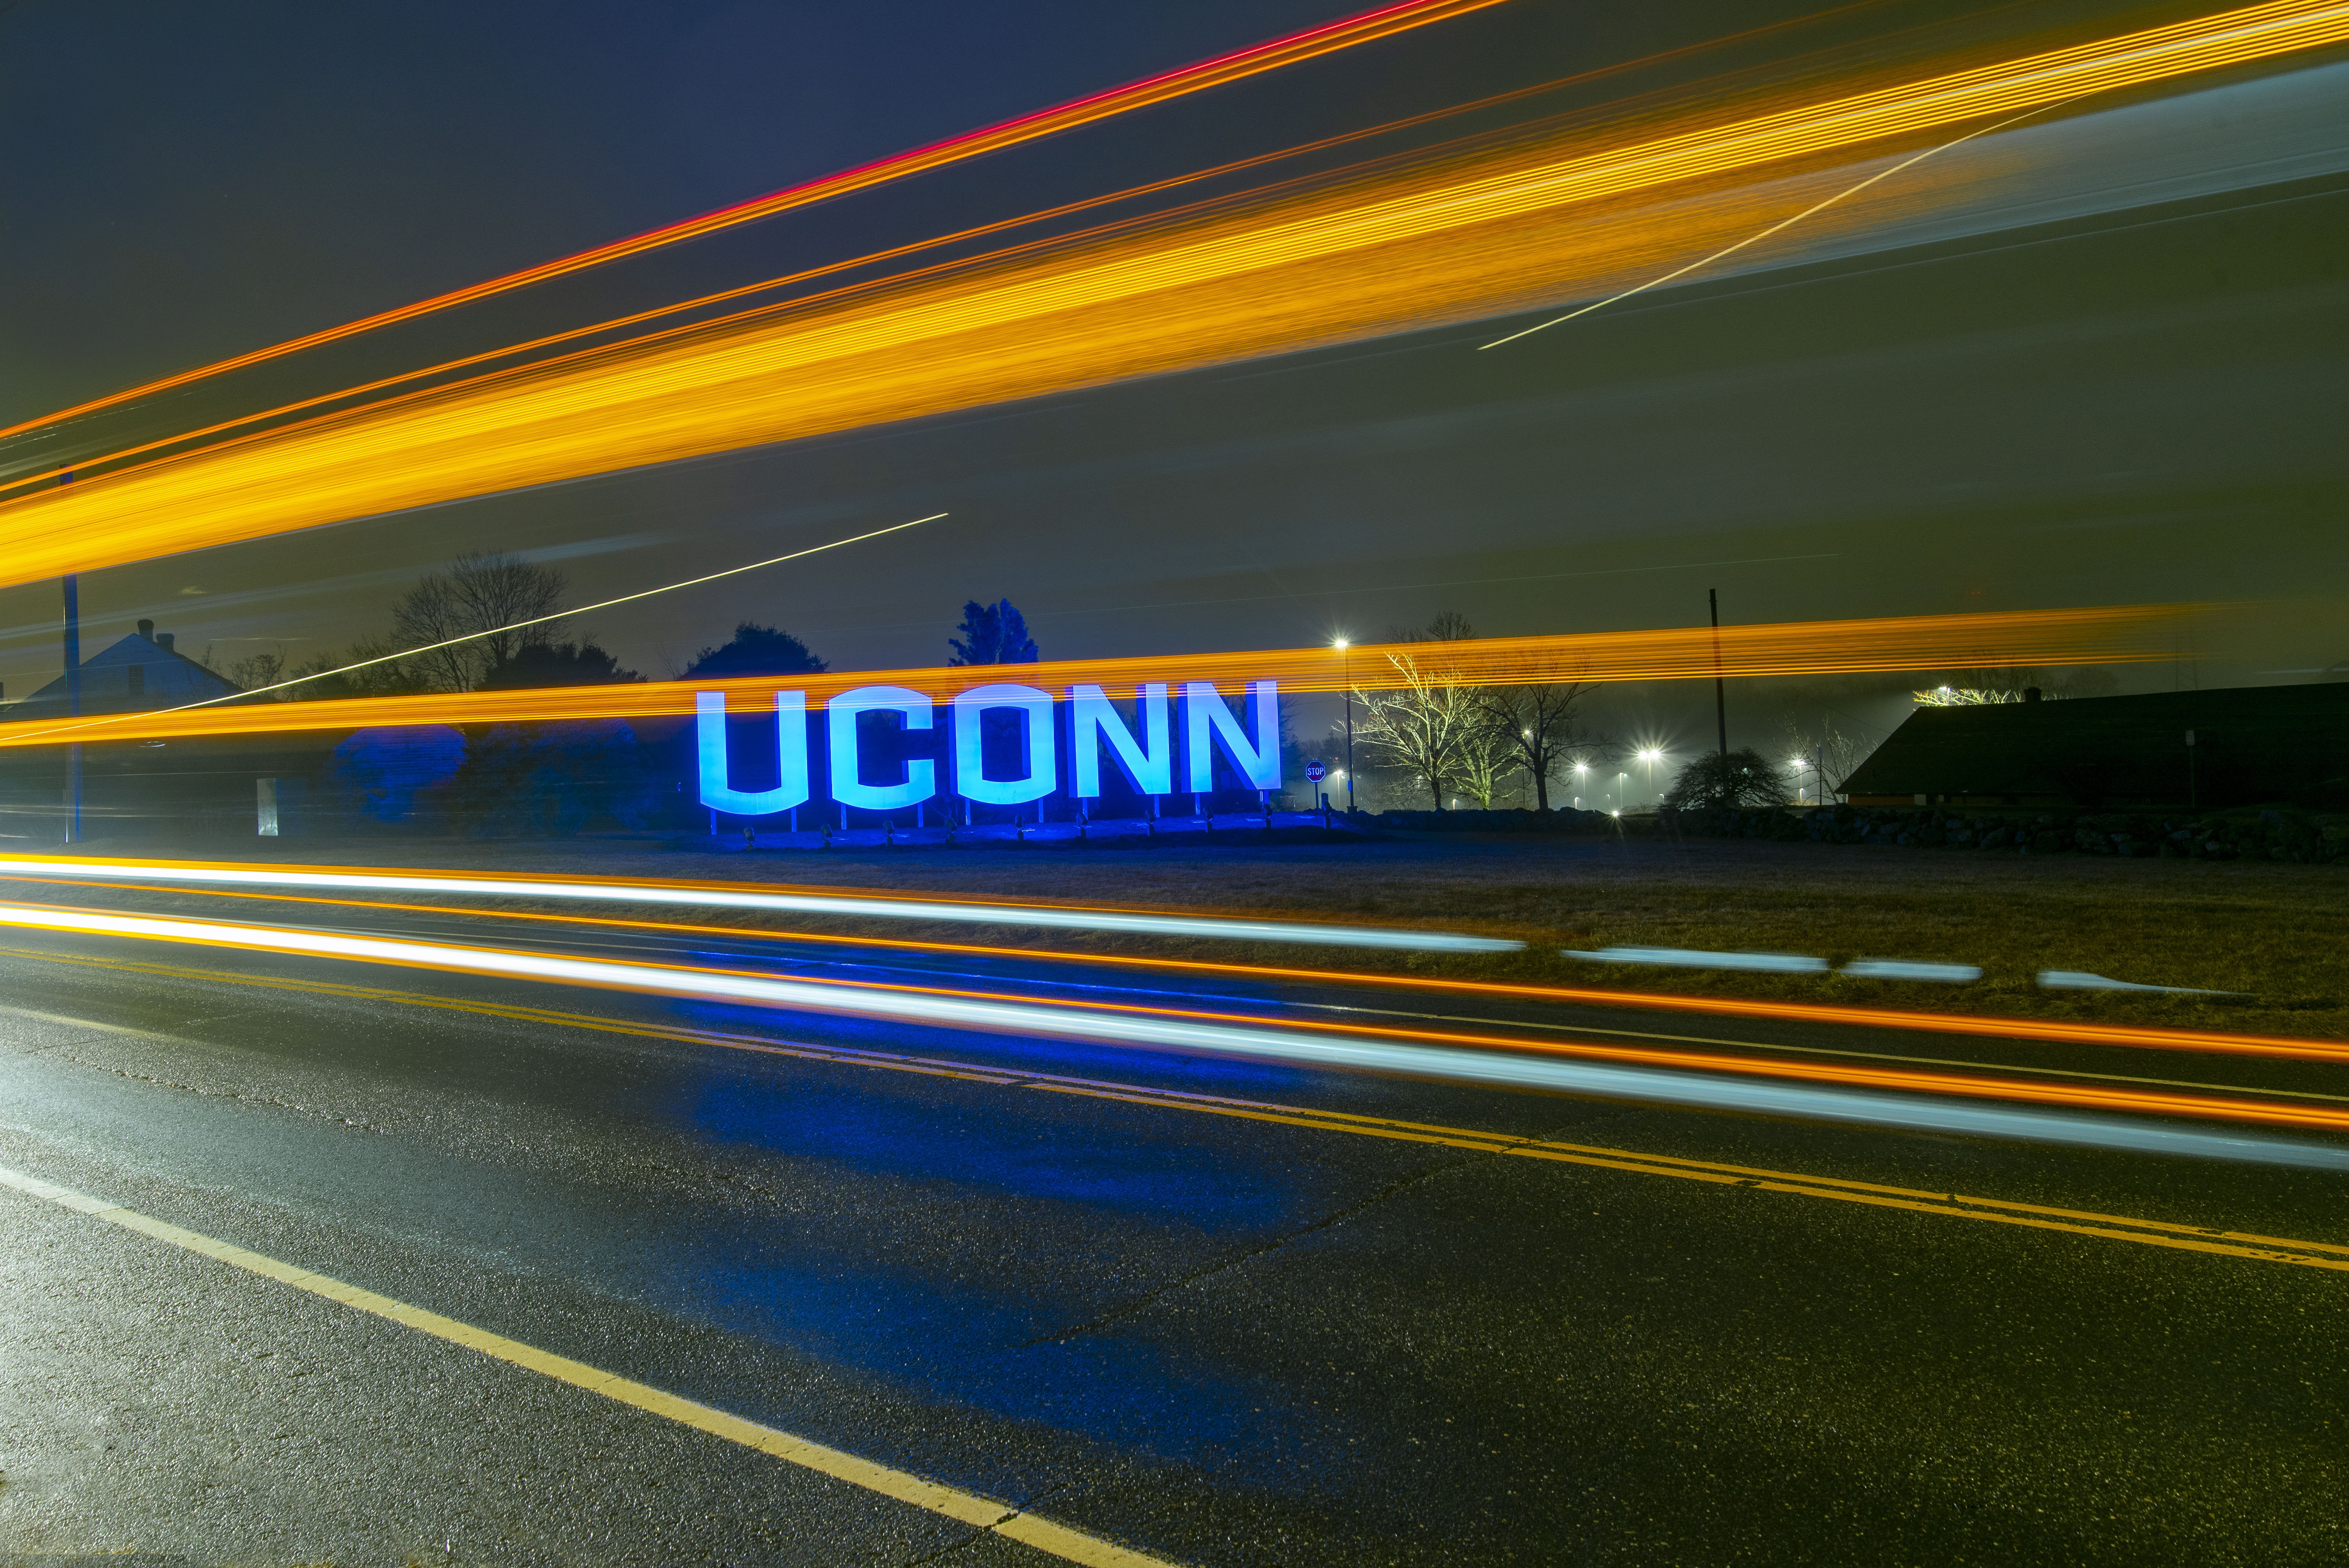 Large UConn sign lit up at night with light trails from car traffic.